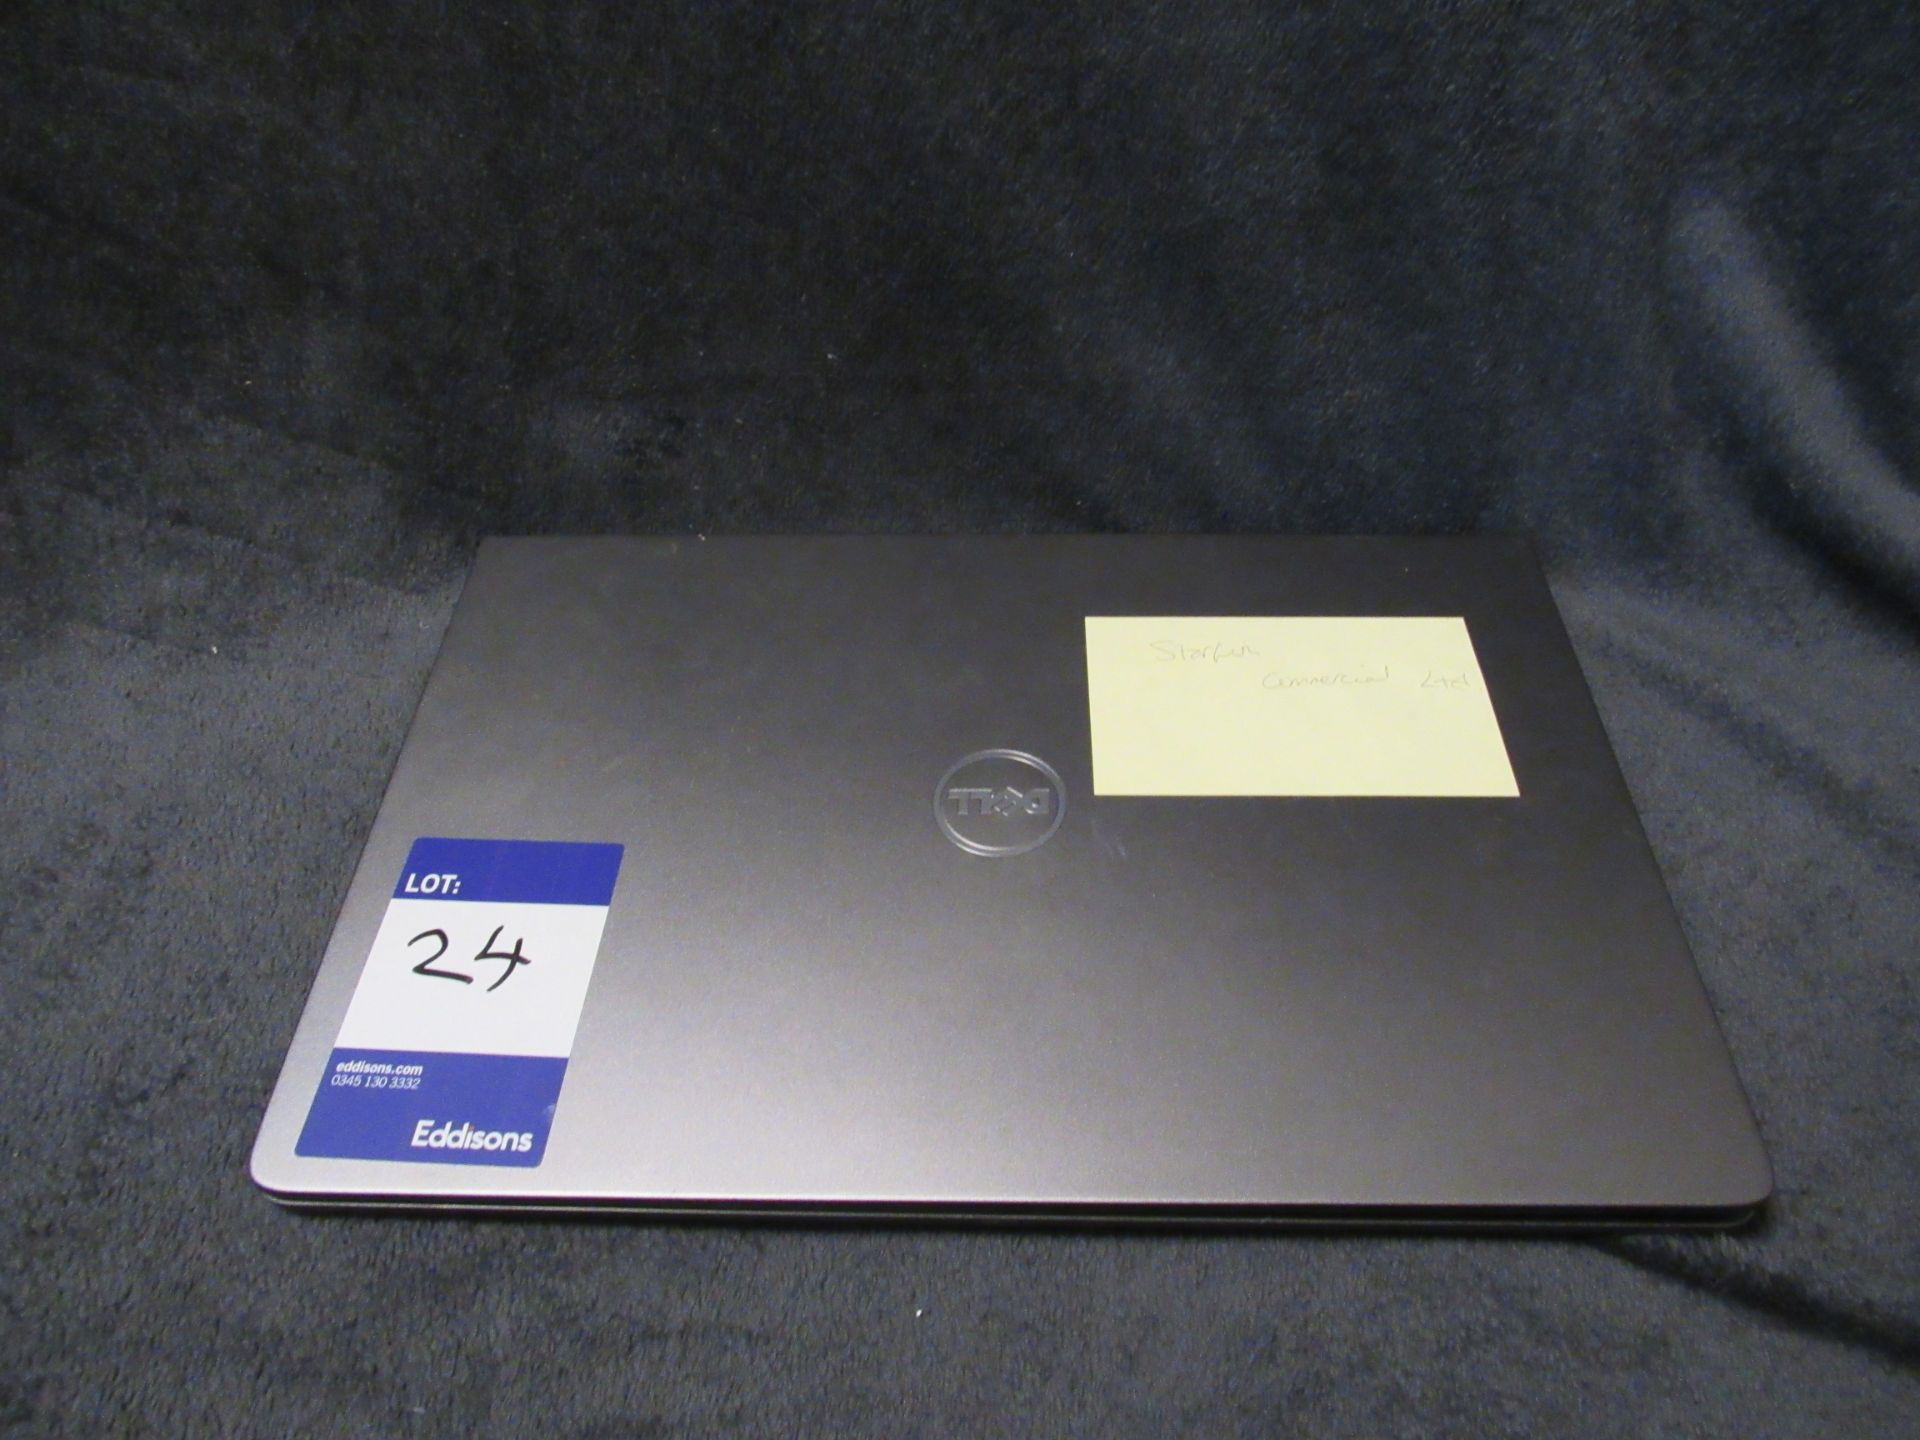 Dell P62F / Service Tag 3Q247H2 Intel i5-7200U 8GB Ram, 256GB SATA 6Gbps M.2 Internal Solid State - Image 7 of 7